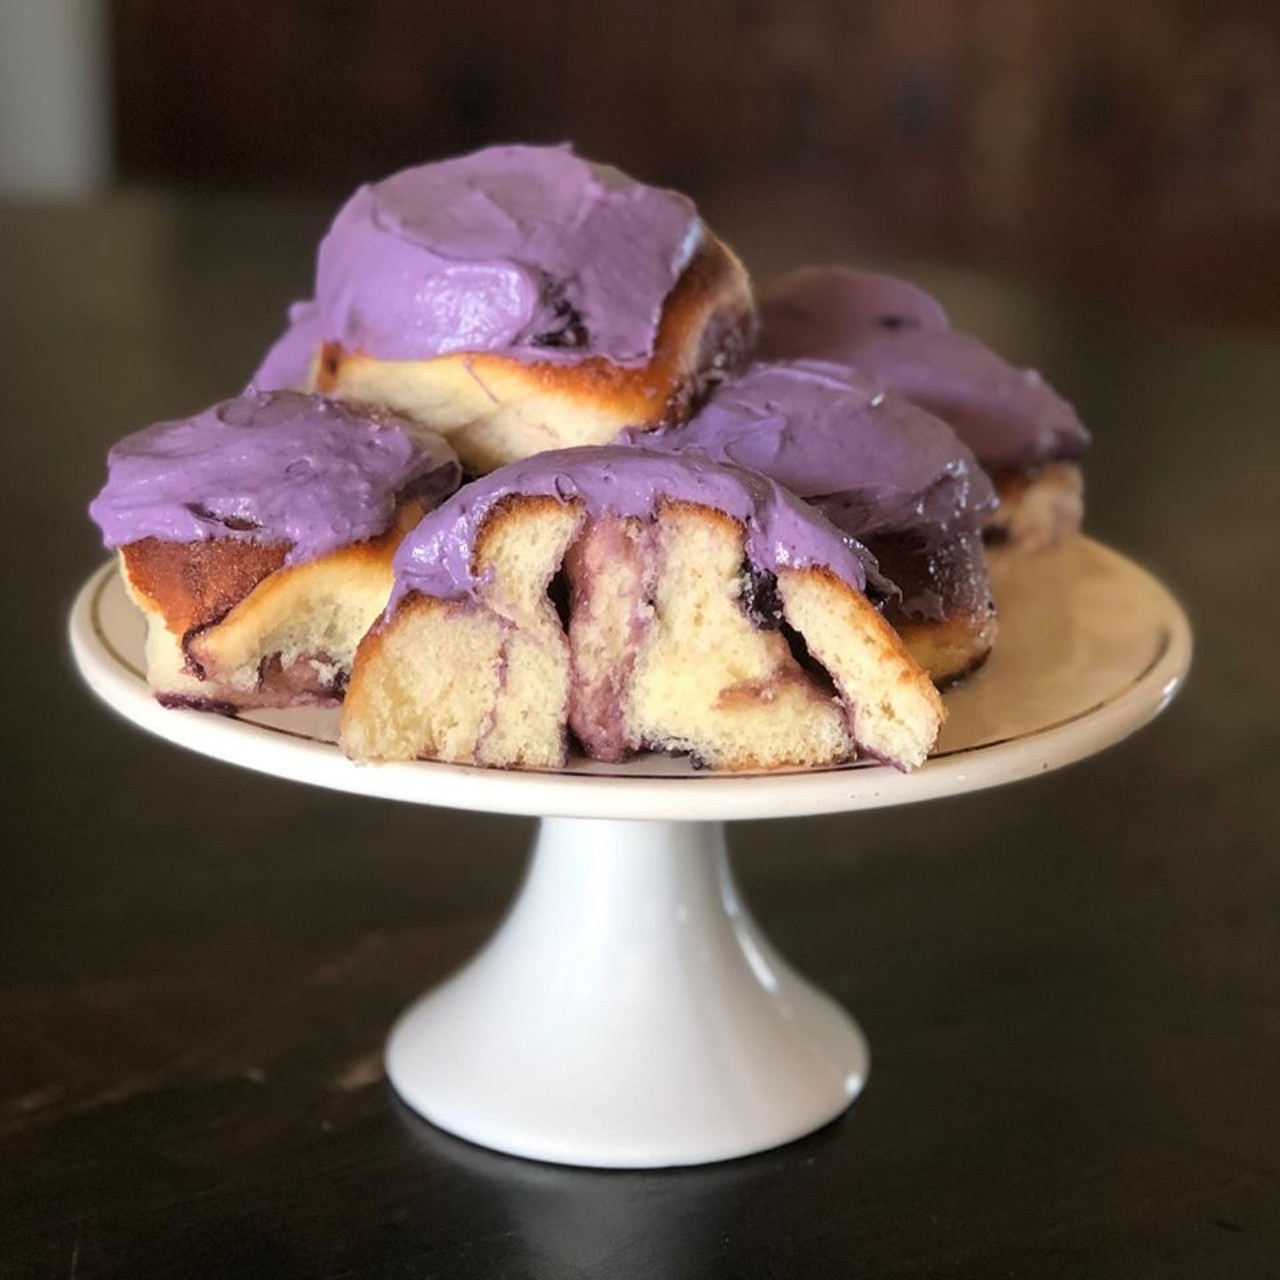 Sari-Sari Filipino Restaurant, Market, & Bakery always delivers when it comes to flavor, whether it's a sweet or savory dish. This stack of Ube Jam Sweet Rolls looks divine!